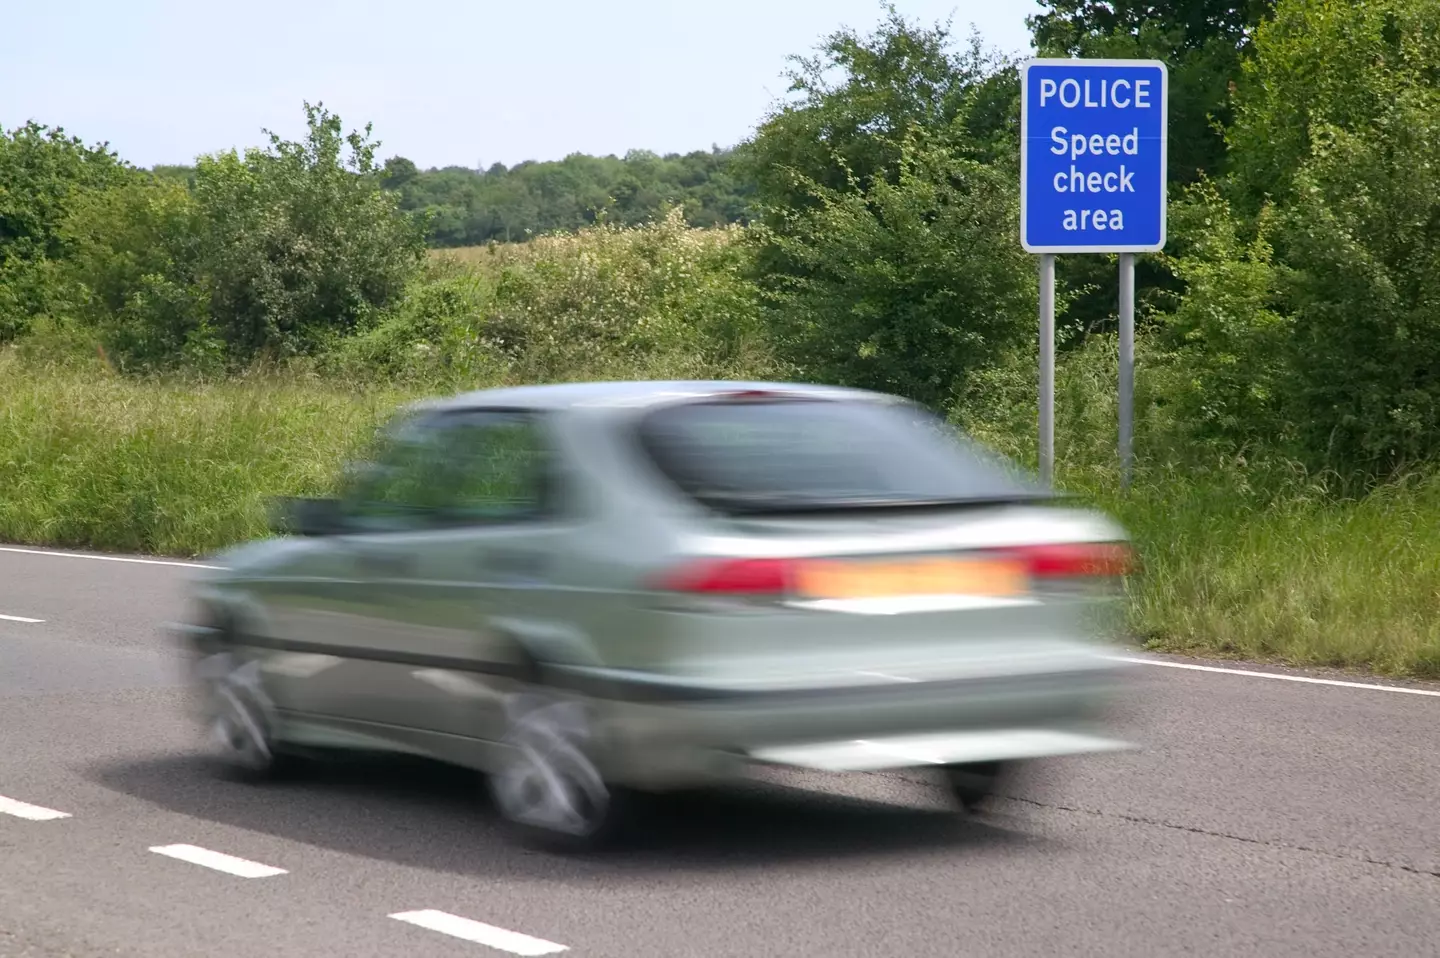 Edmund King, the AA president, said: "If drivers struggle with the limits, most modern cars have speed limiters and often sat navs will flag up speed warnings.